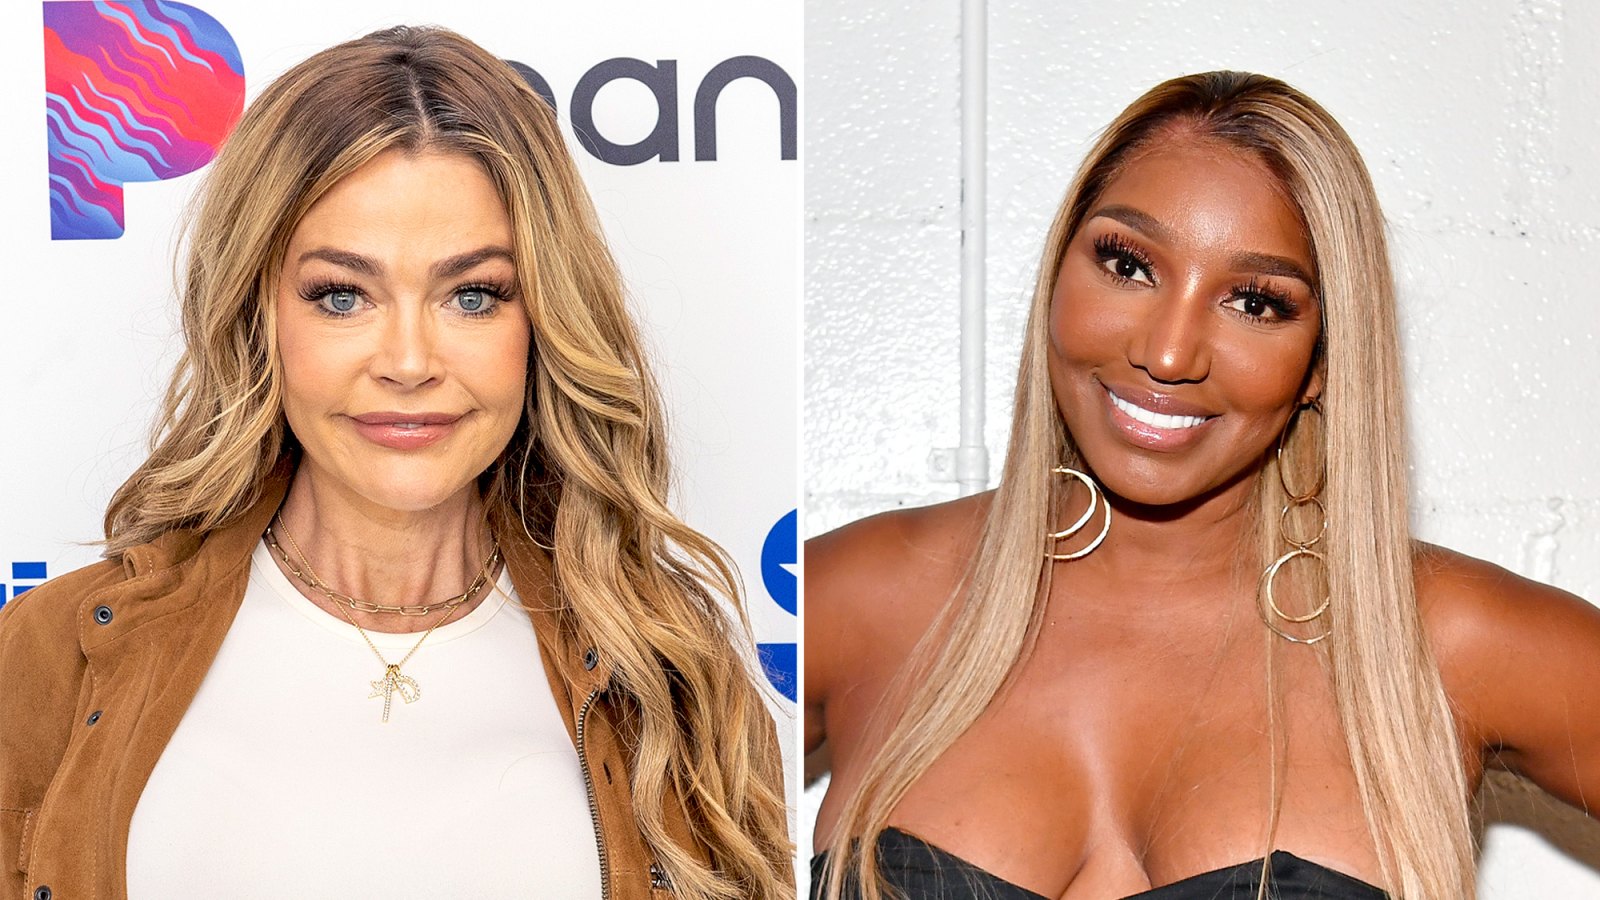 Denise Richards NeNe Leakes to Play Stranded Housewives in Lifetime Movie